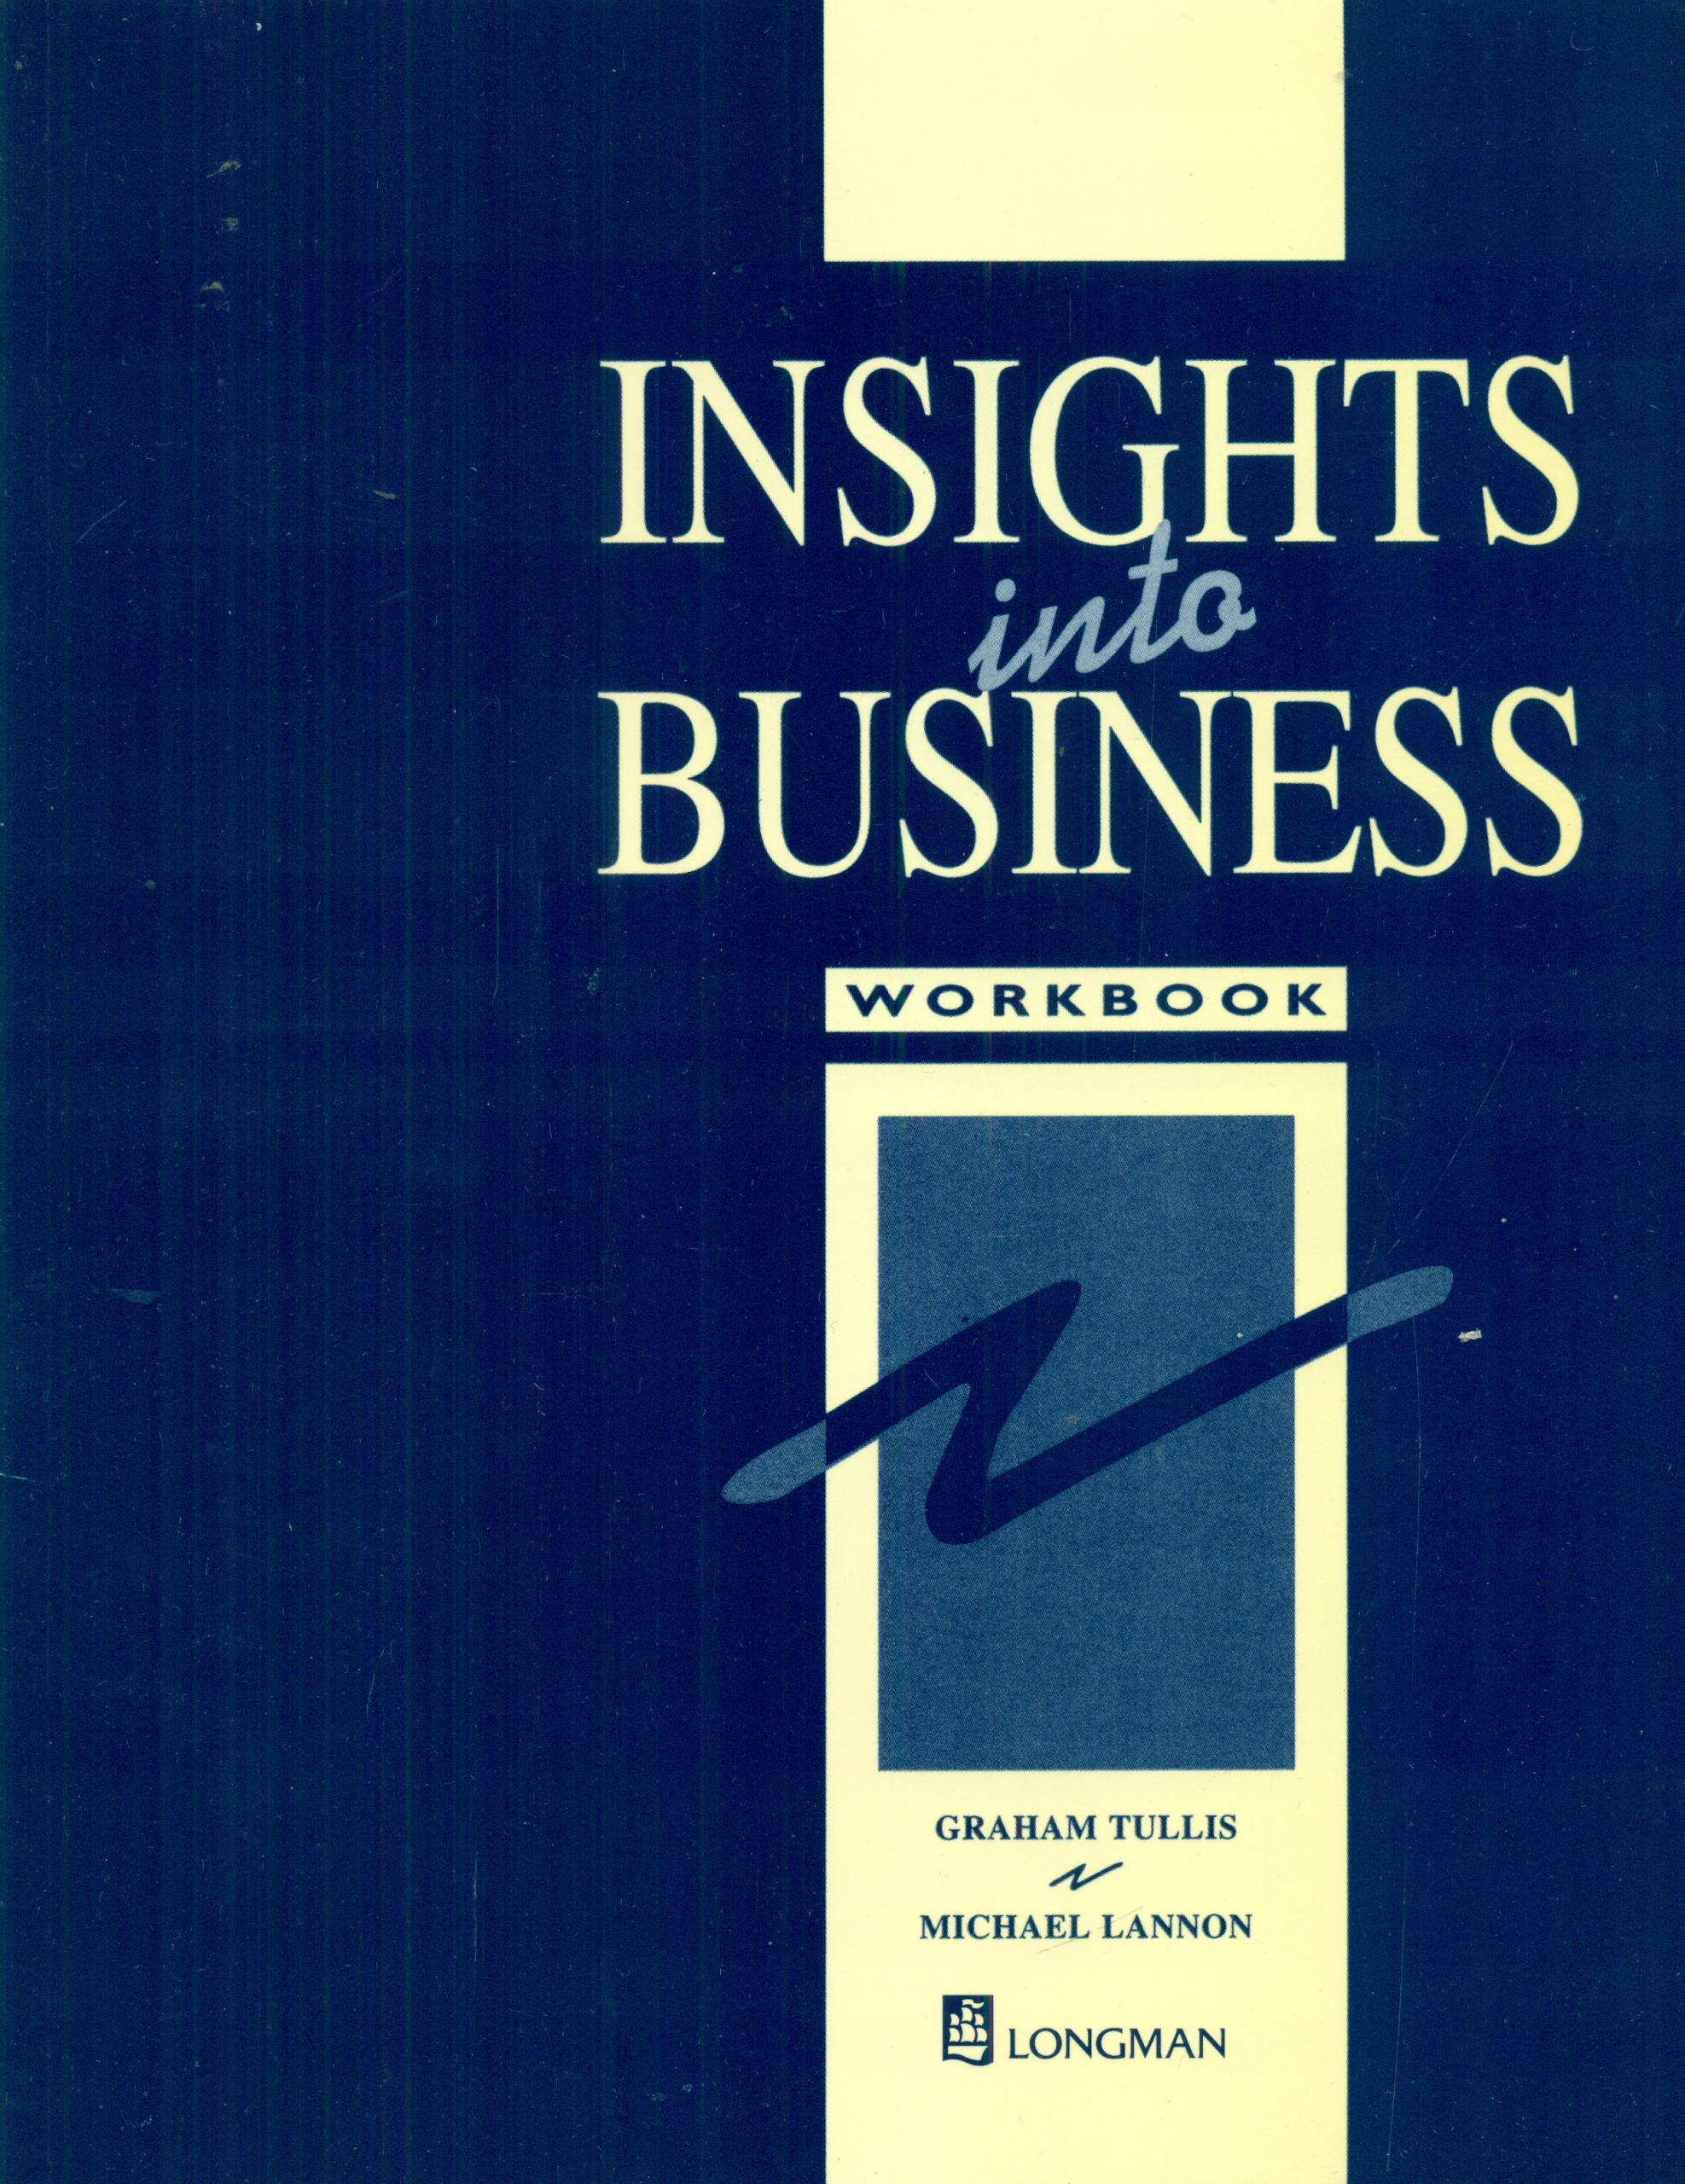 INSIGHTS INTO BUSINESS - WORKBOOK